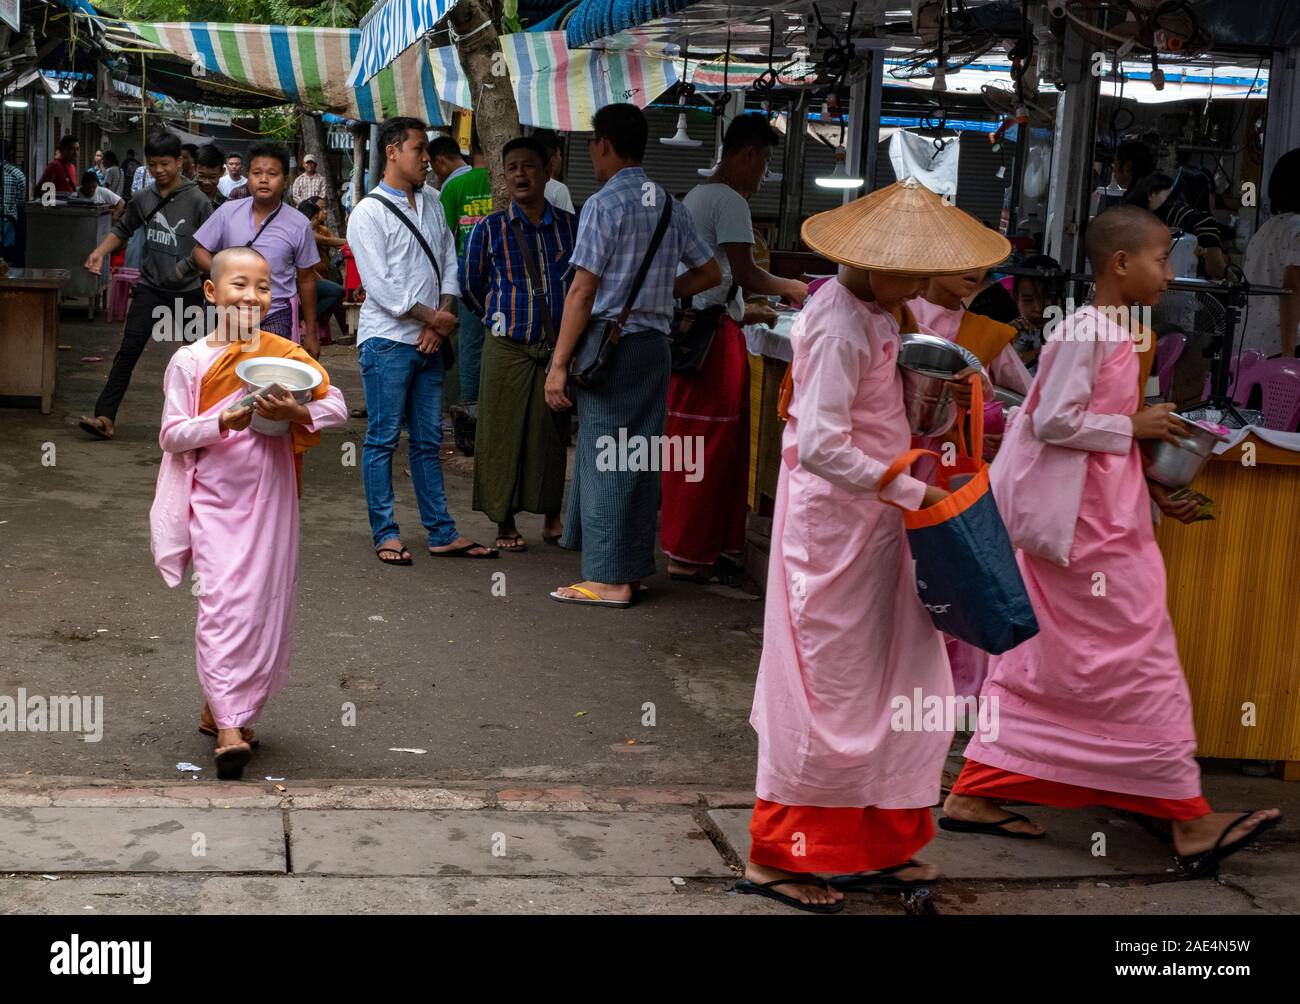 Buddhist nuns pass through a market with their alms bowls in search of donations during a holy day in Mandalay, Myanmar (Burma) Stock Photo